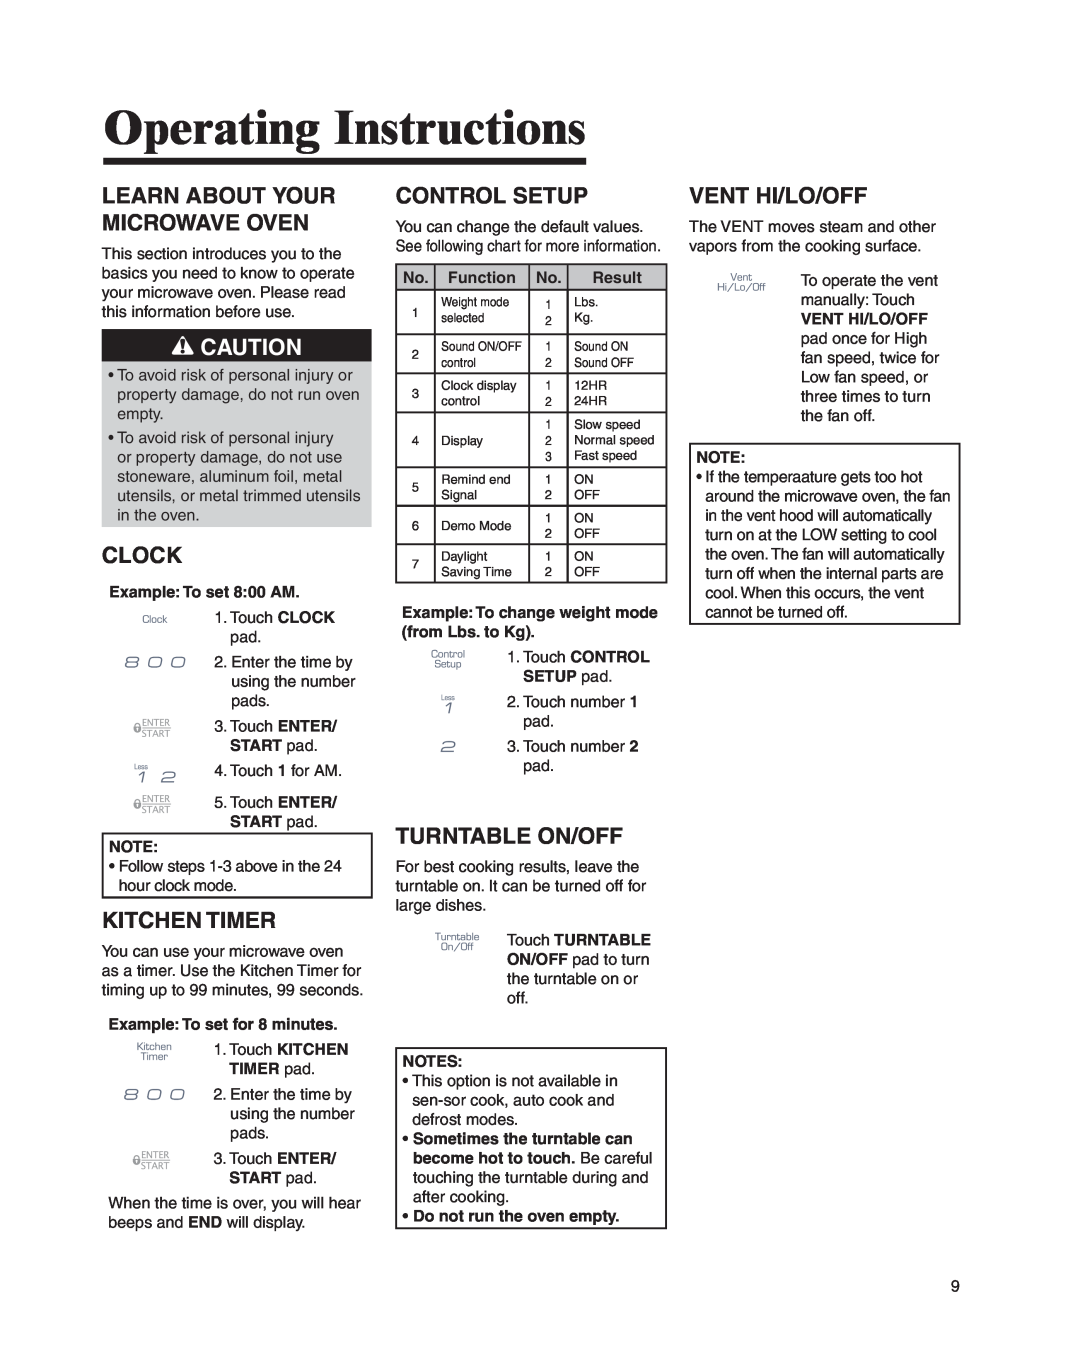 Whirlpool MMV4205BA Operating Instructions, Learn About Your Microwave Oven, Clock, Kitchen Timer, Control Setup 